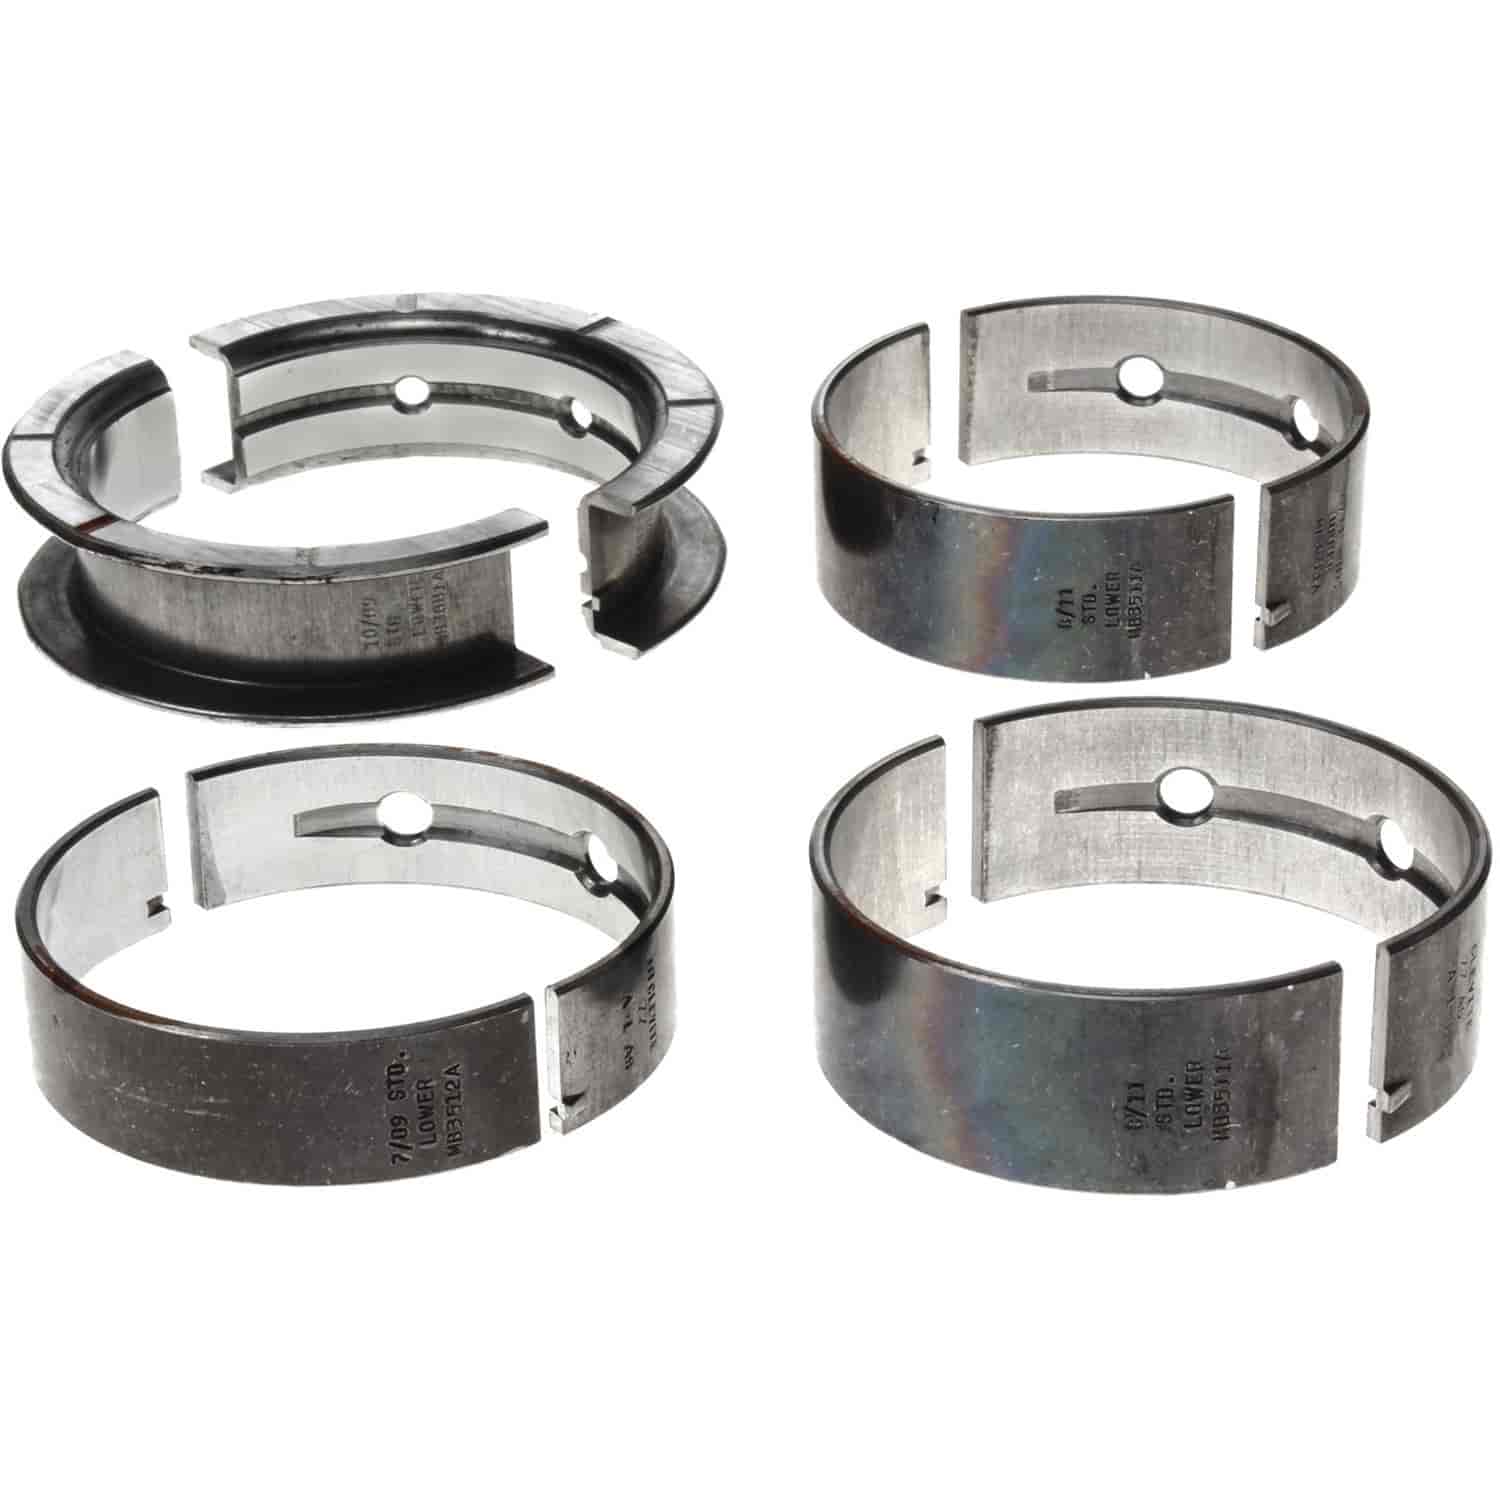 Main Bearing Set Chevy 1985-2009 V6 2.8/3.1/3.4L with -.25mm Undersize